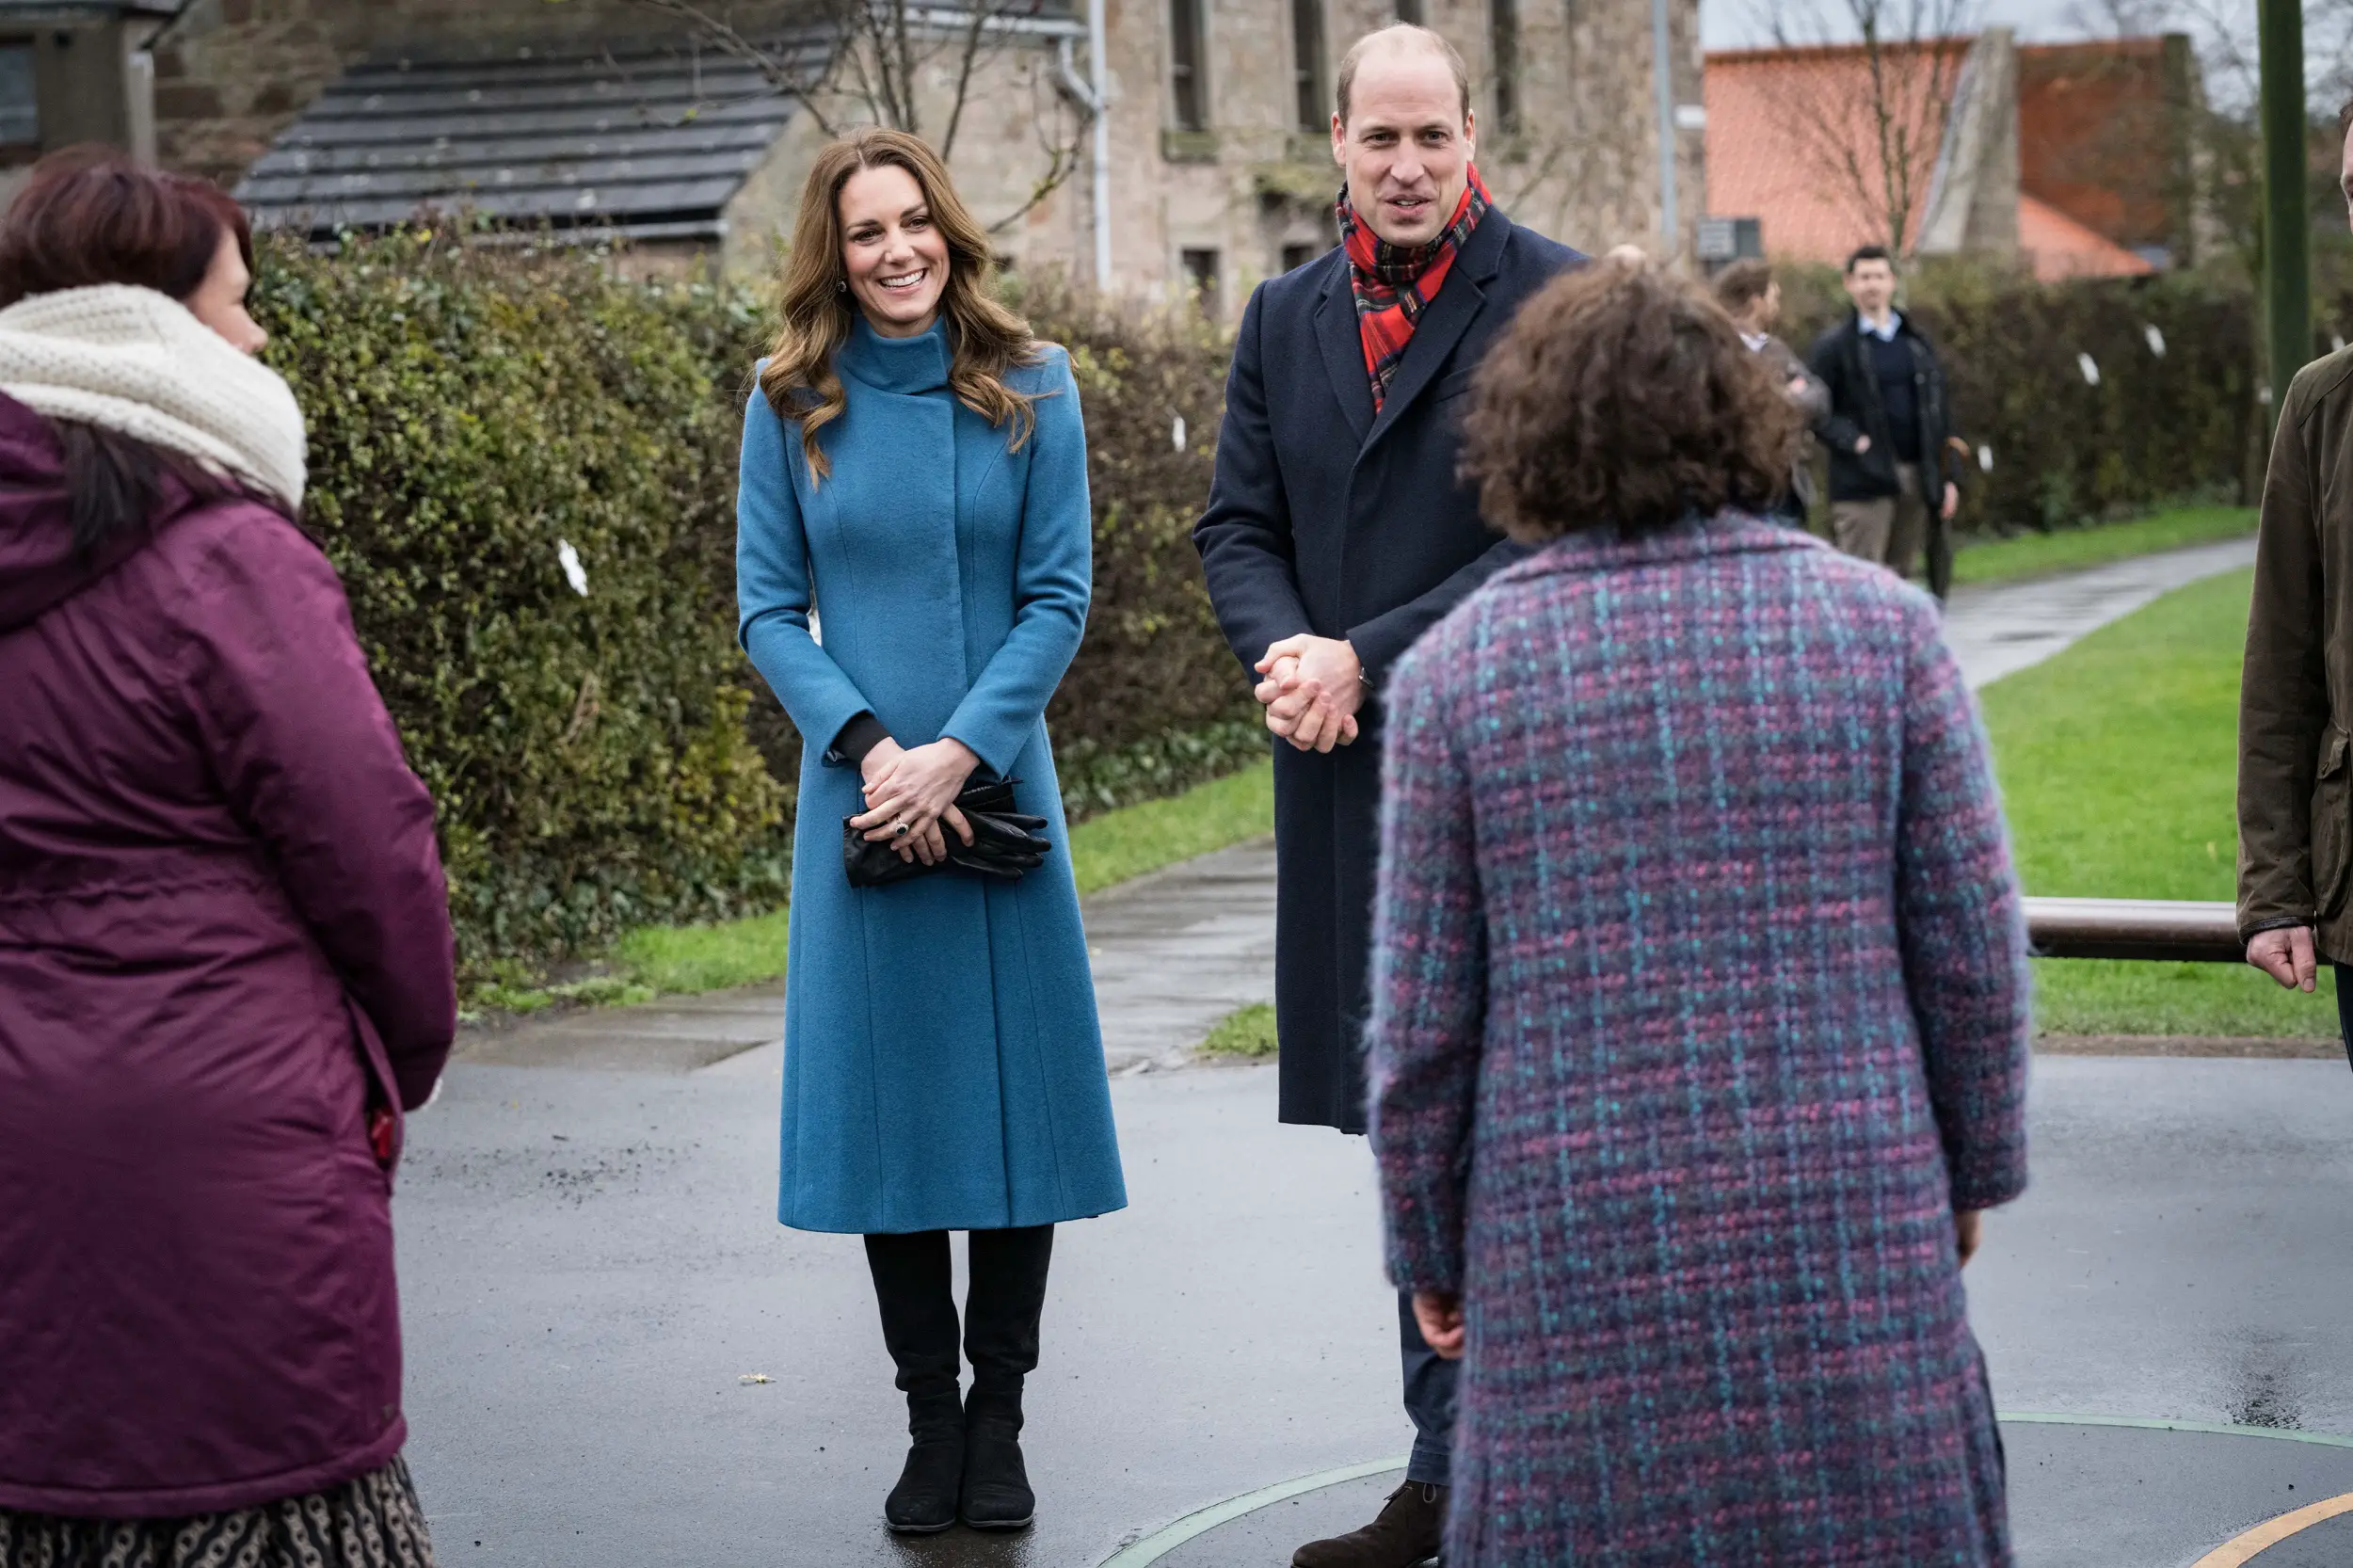 The Duchess of Cambridge wore Catherine Walker teal blue high-neck coat on the Day 2 of Royal Train tour in Edinbrugh